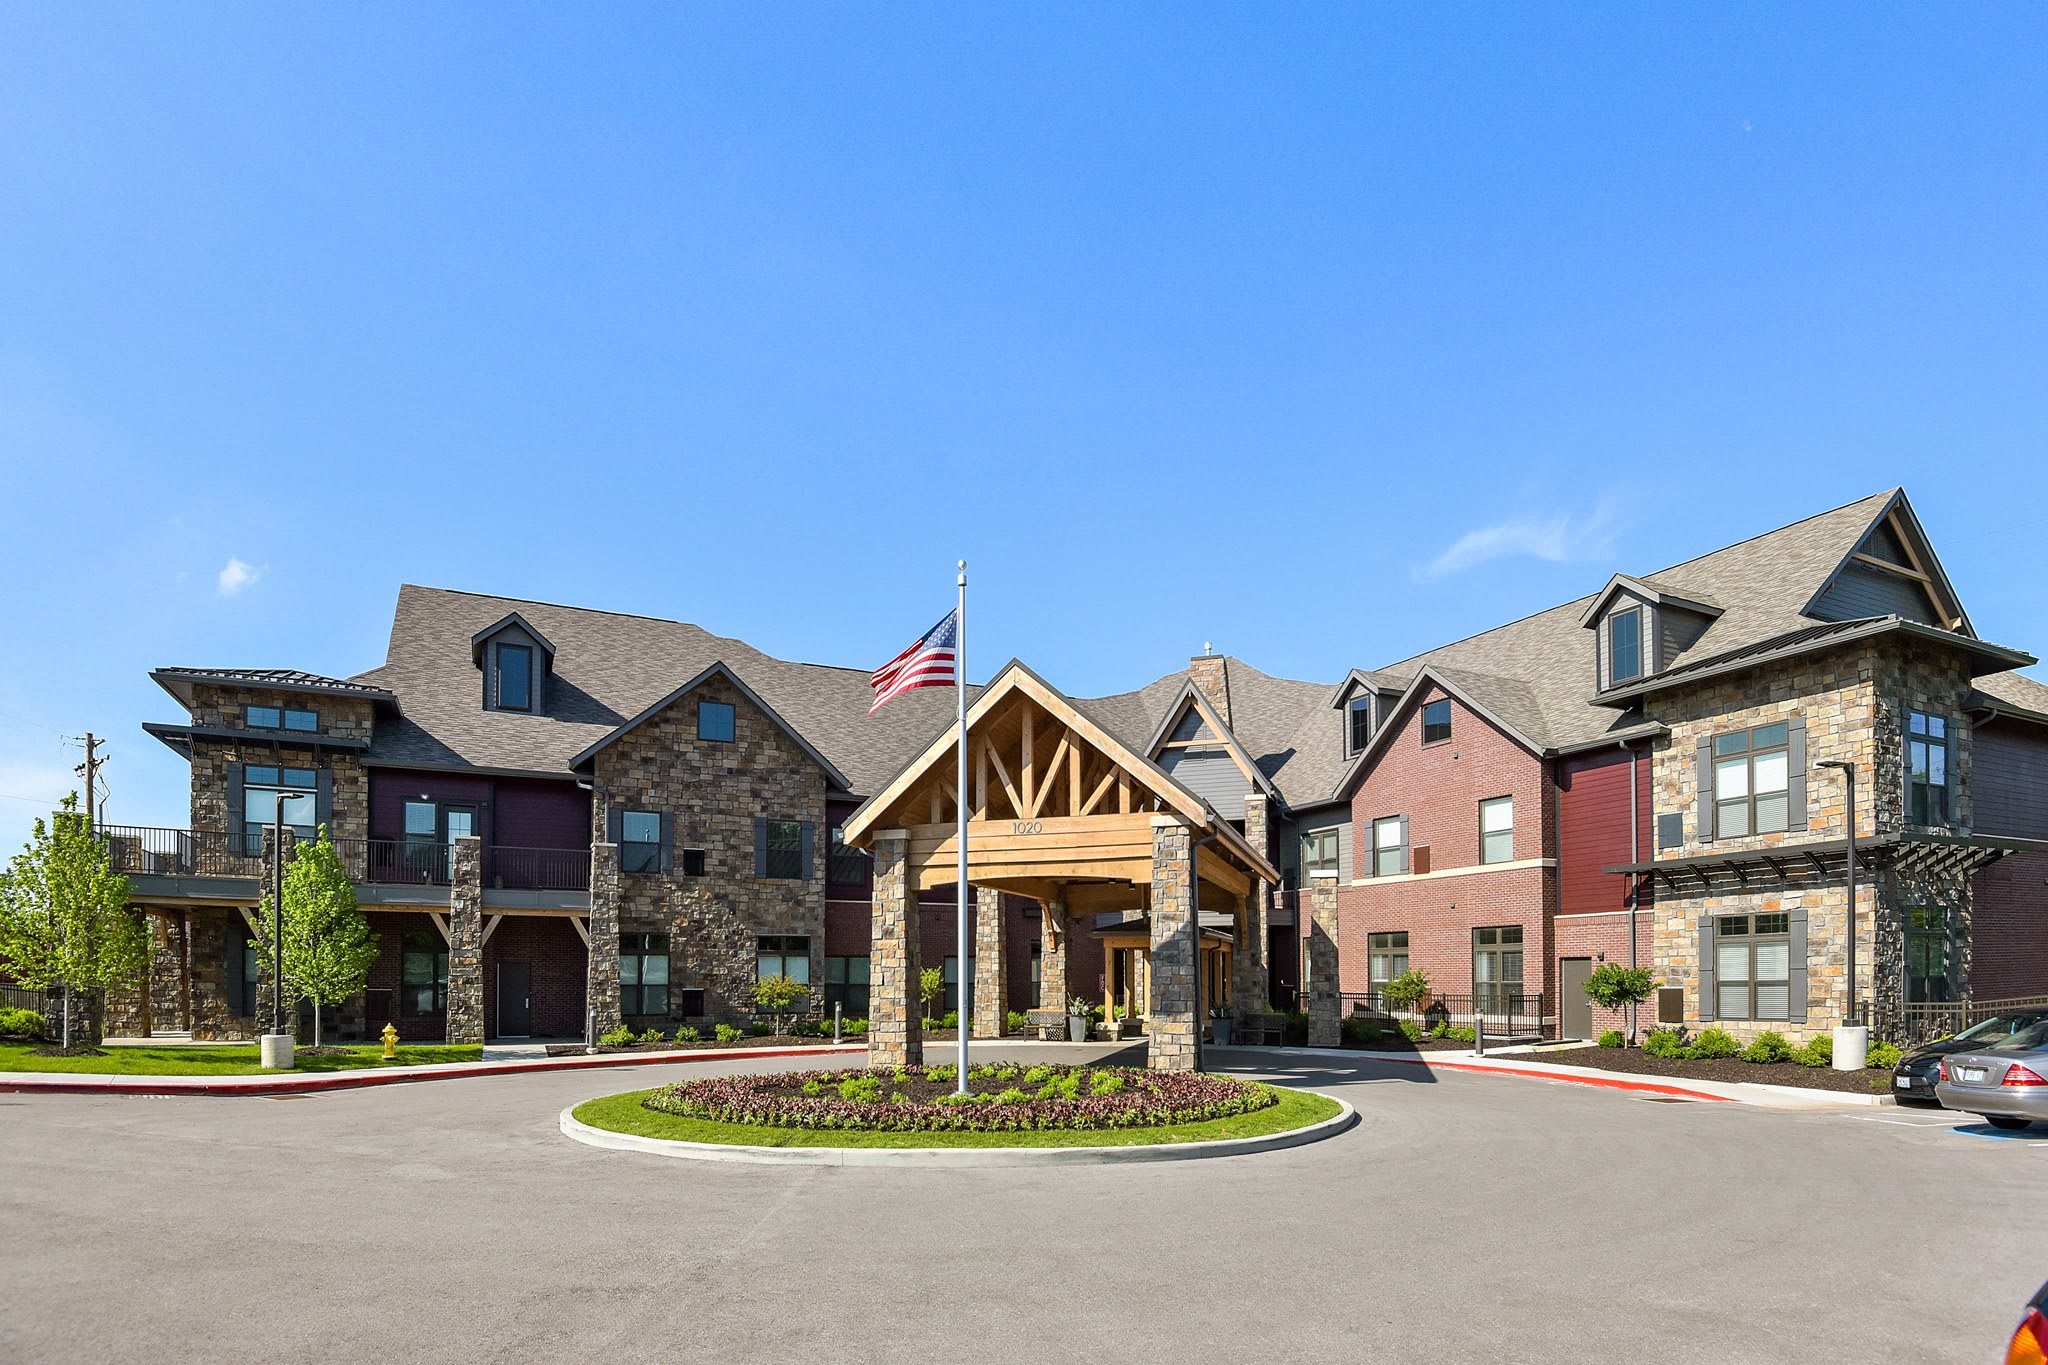 The Town and Country Senior Living community exterior